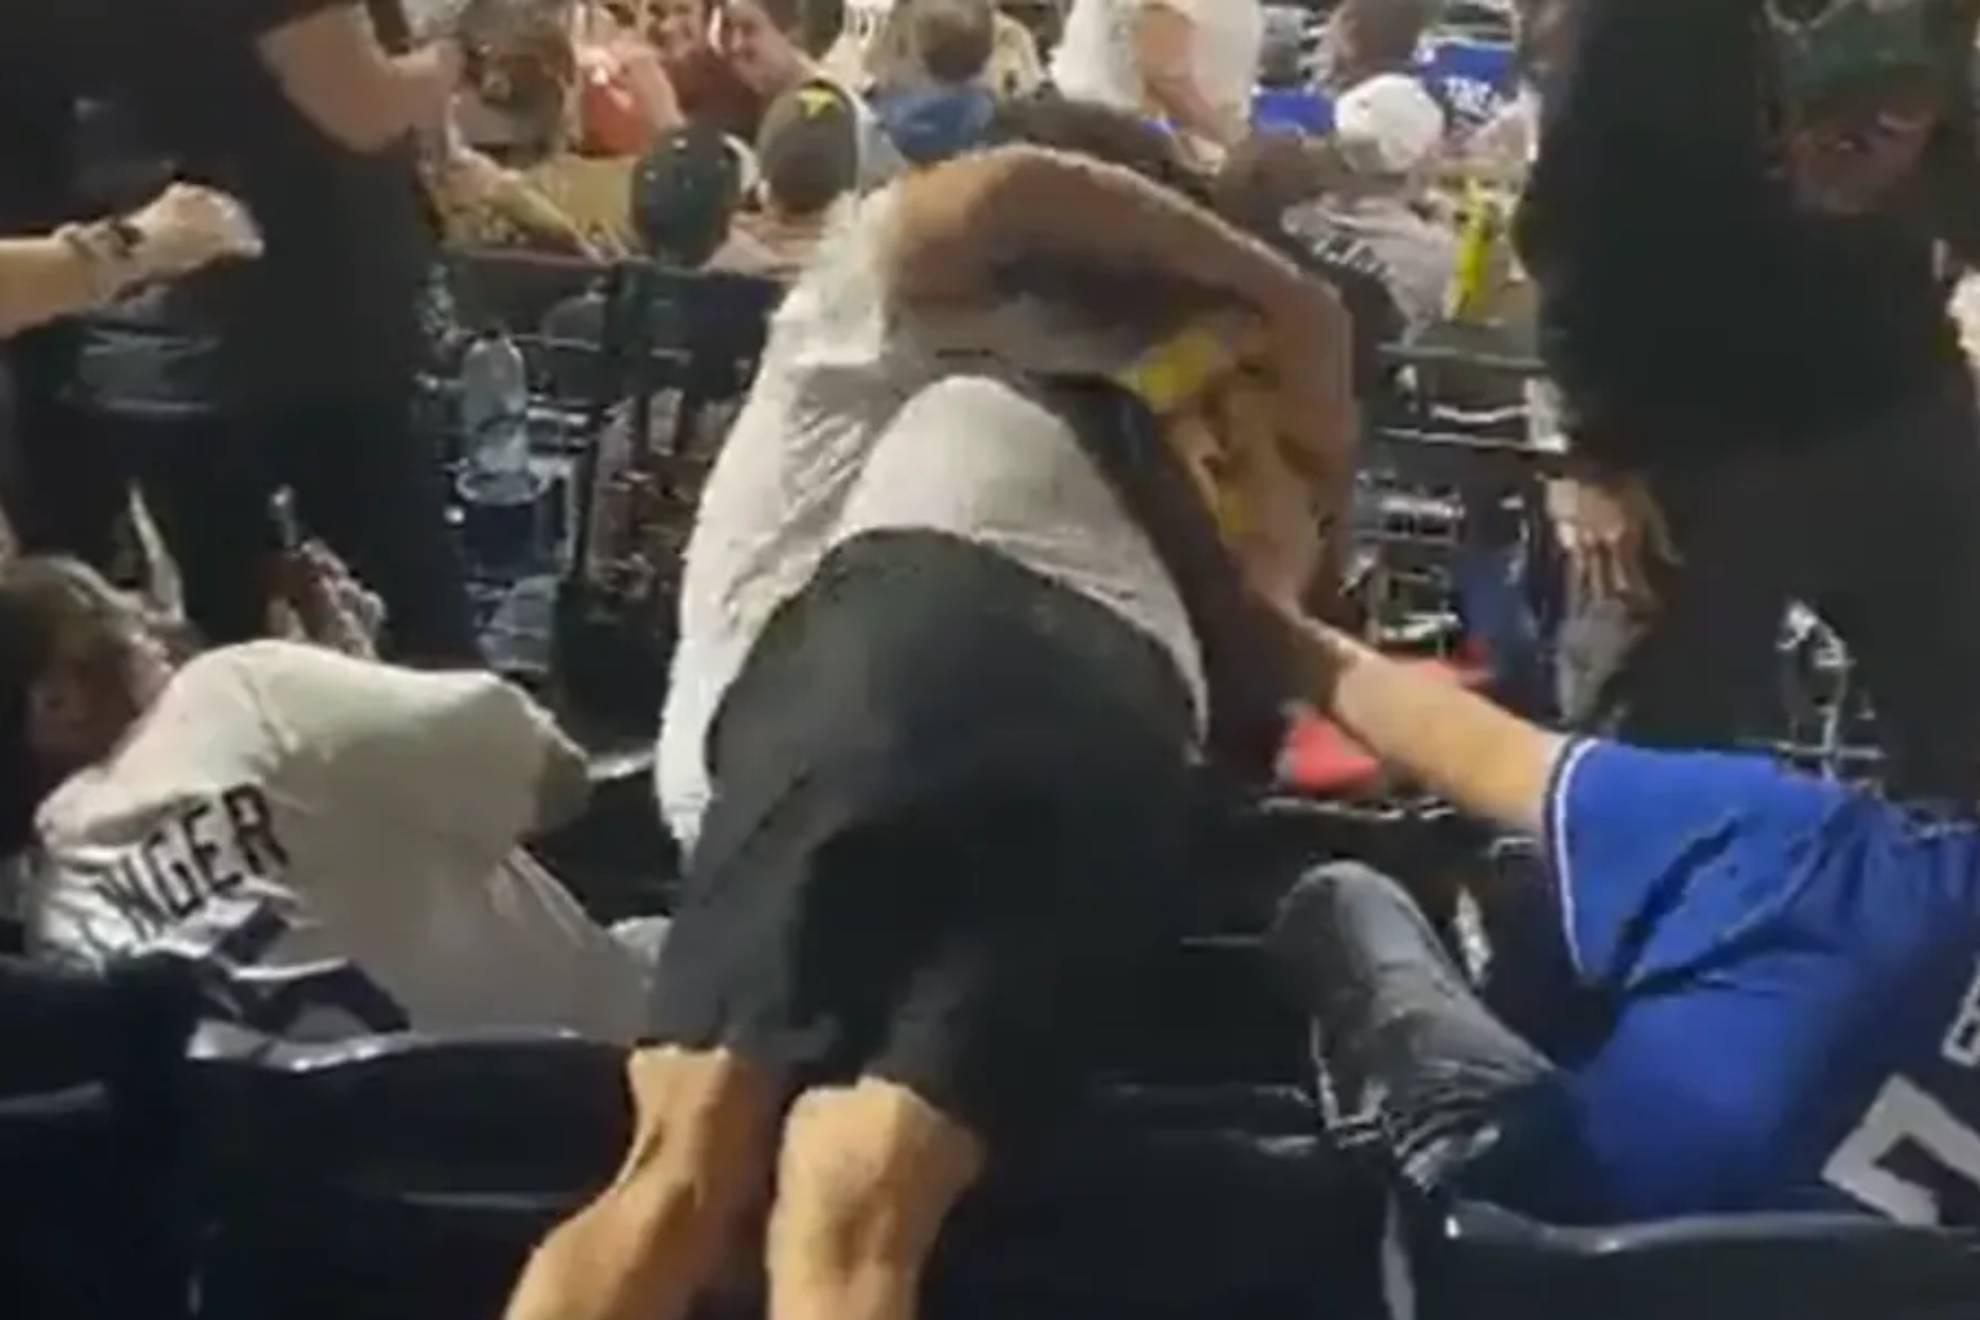 Dodgers, Padres fans brawl at Petco Park, one man bloodied